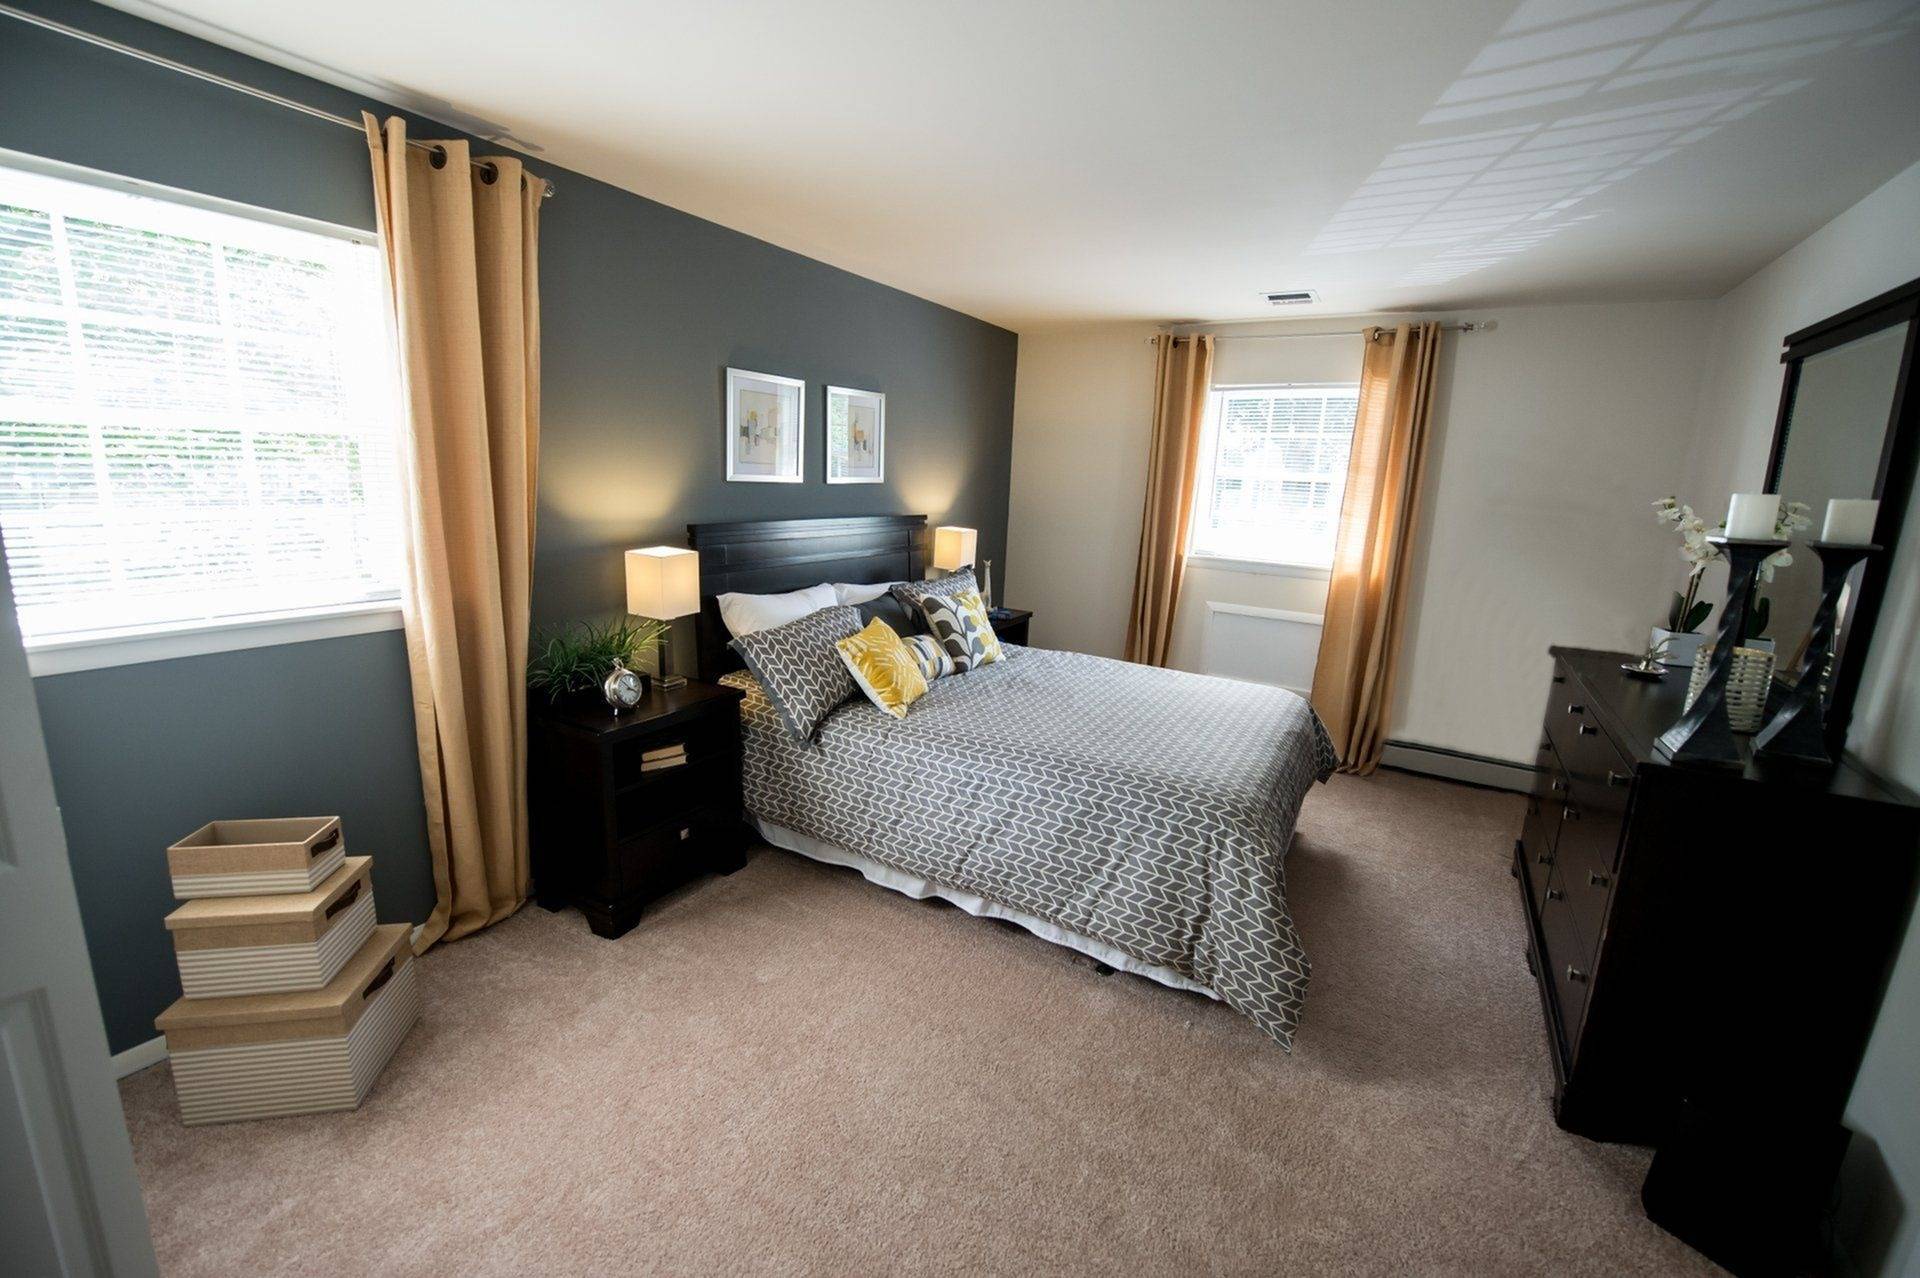 West Chester Apartments - Spacious Bedroom With Carpet Flooring, Modern Decor, And Two Windows With Blinds.